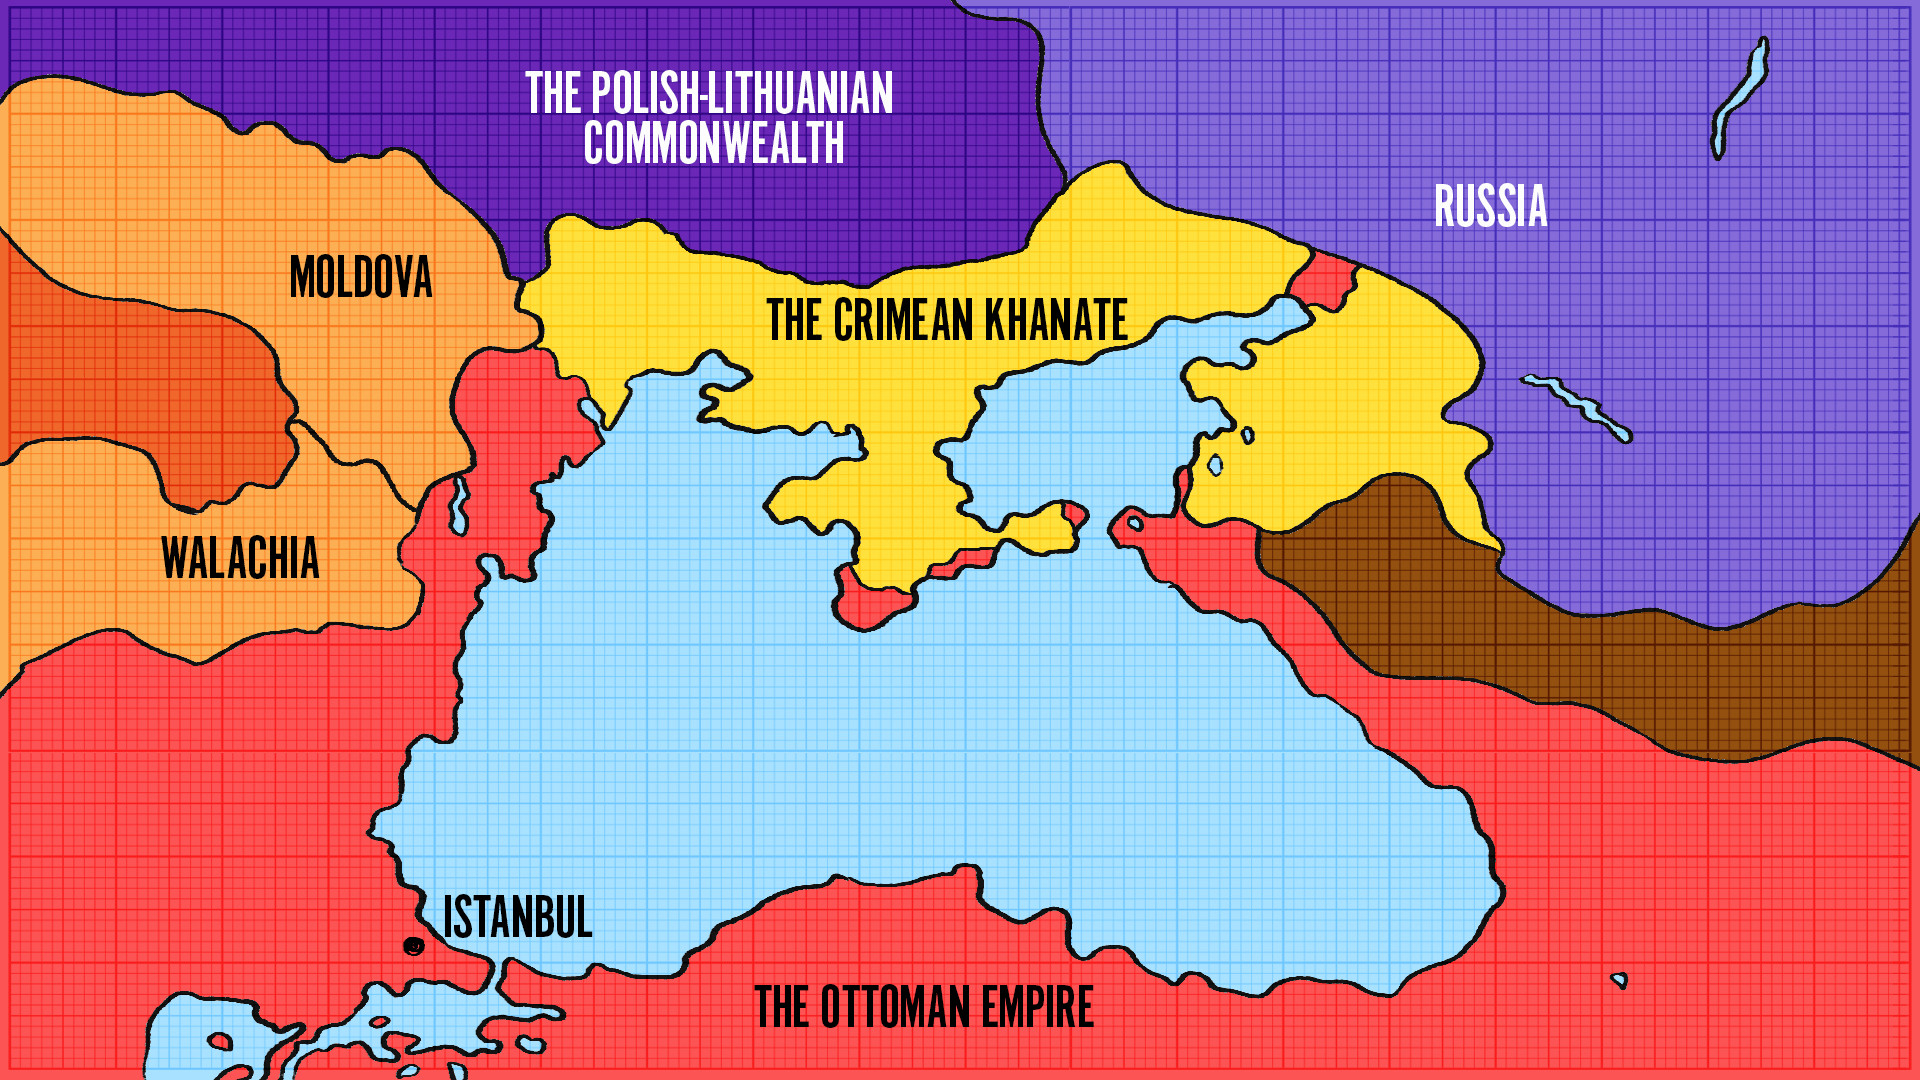 From South, Crimea was surrounded by the Ottoman Empire's lands